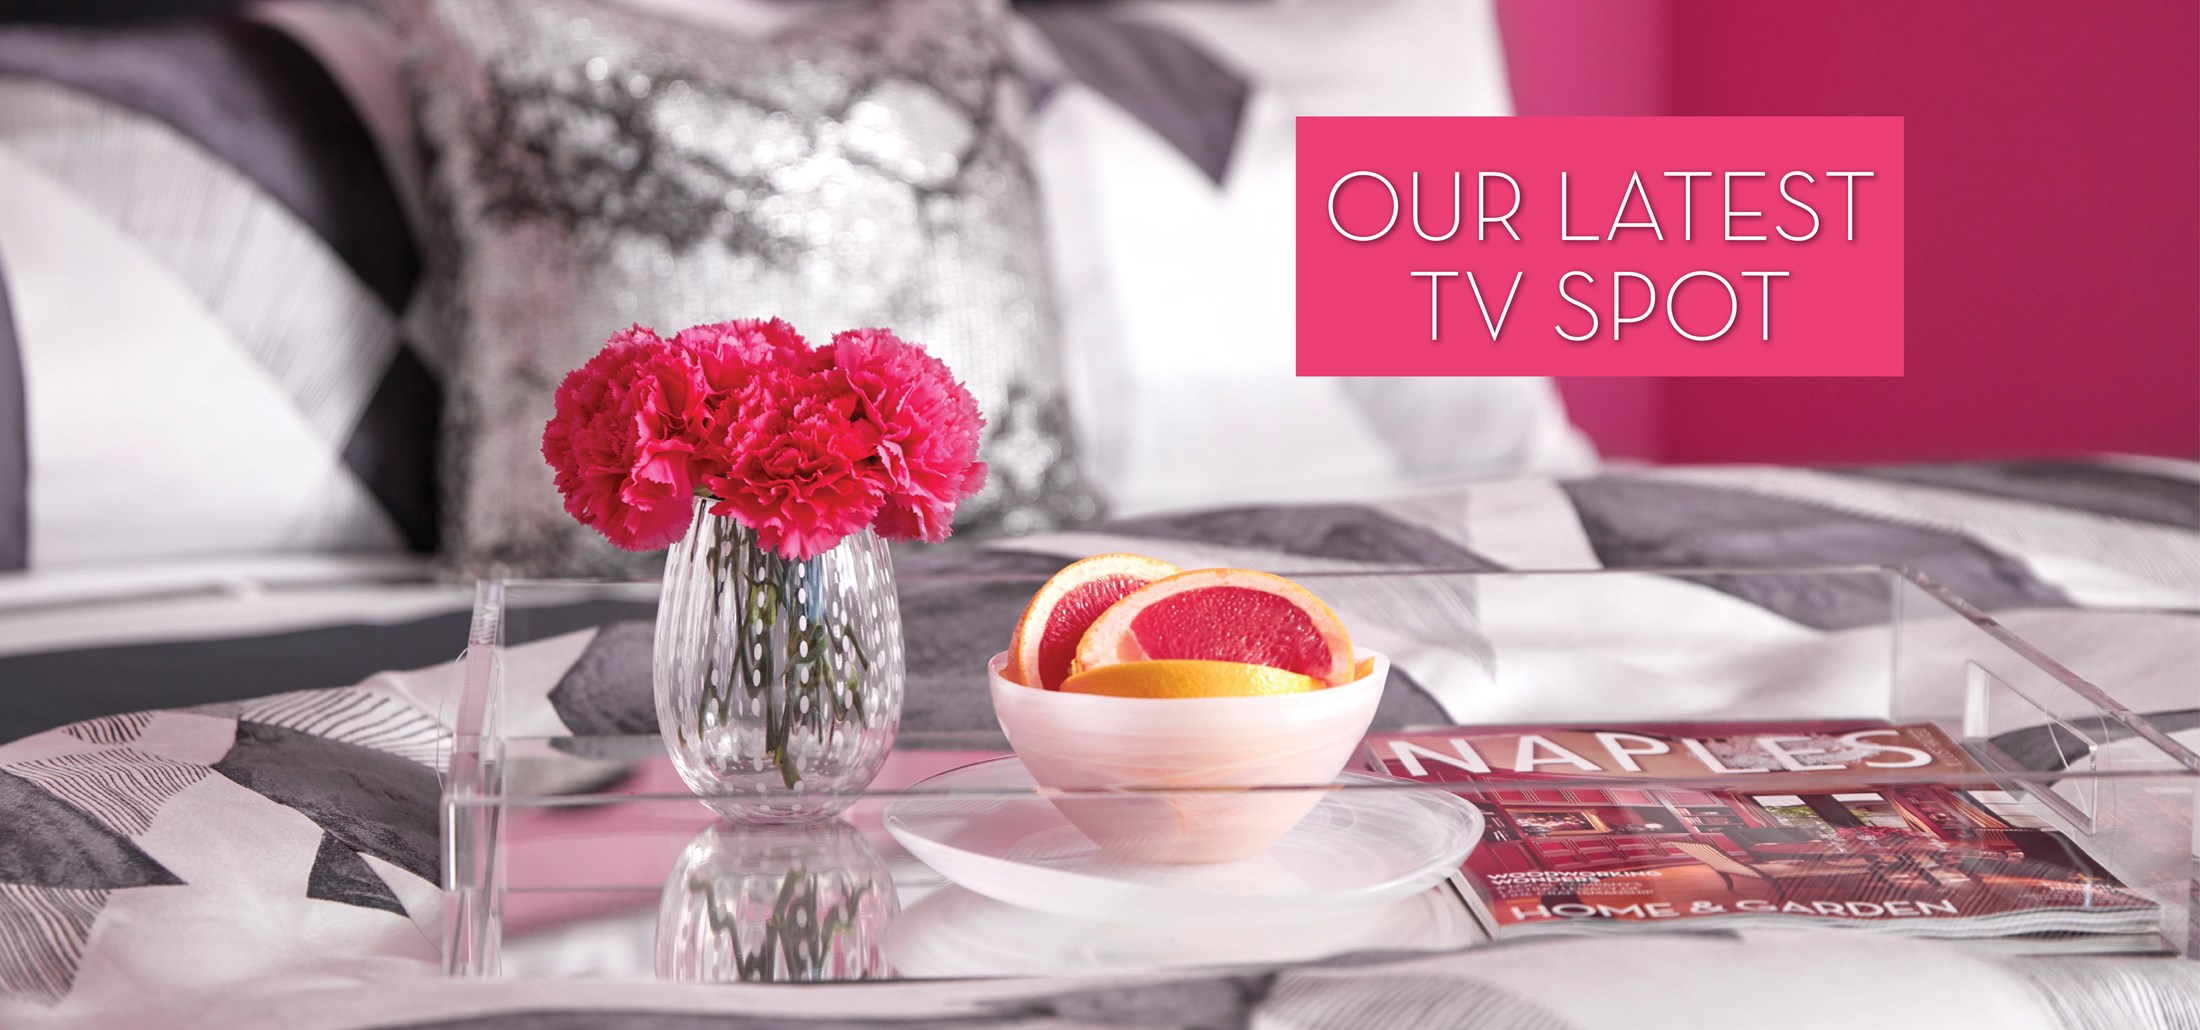 Photo of a tray with flowers and fruit on a bed with black and white bedding. Text: Our Latest TV Spot. Links to TV Spot on Youtube.